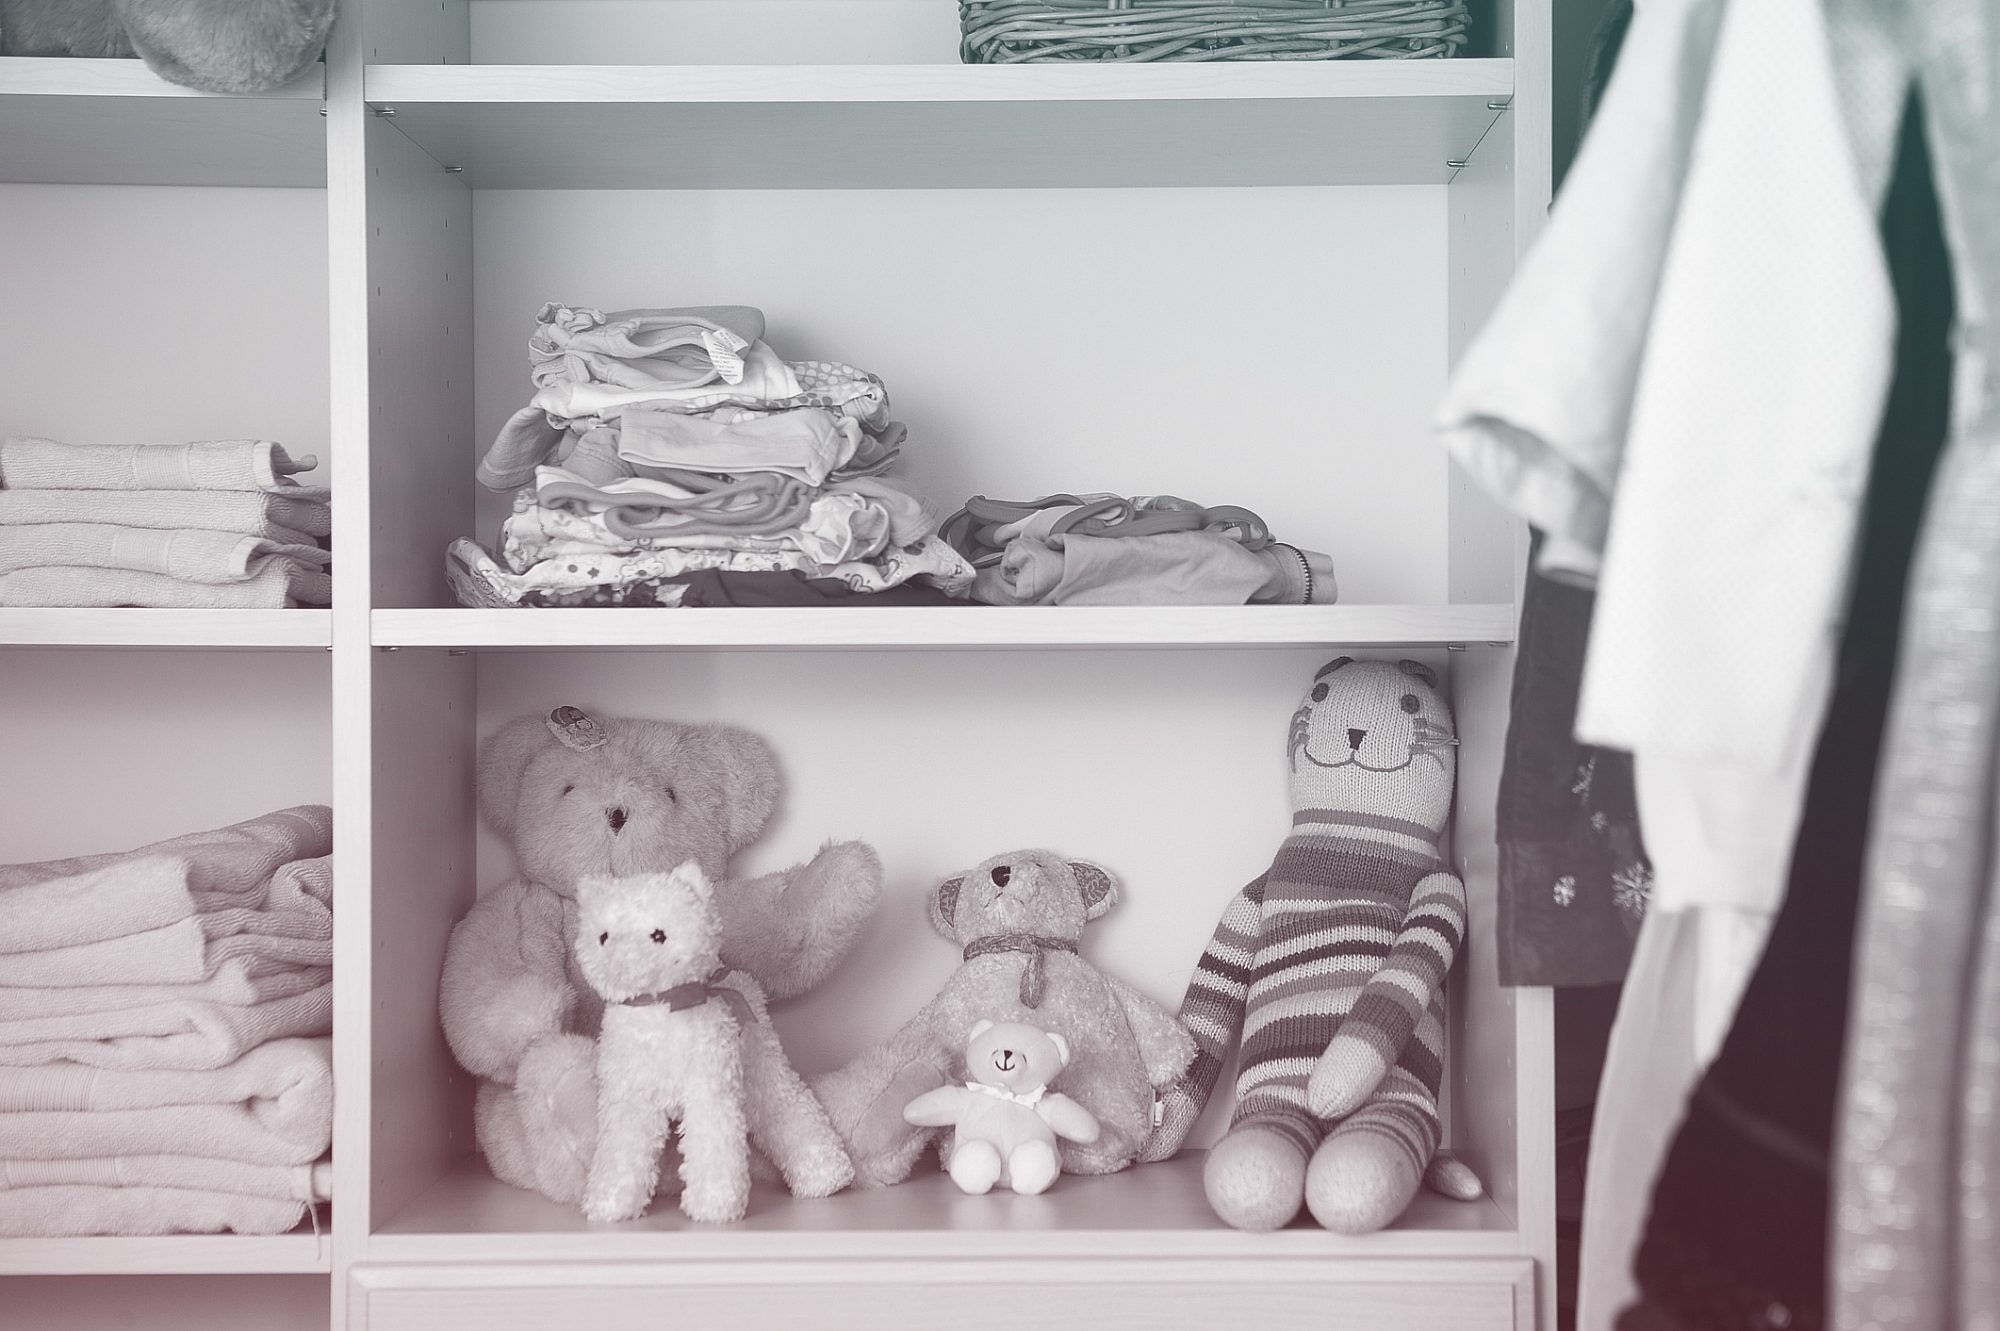 Stuffed animals, clothing and towels on shelves in closet